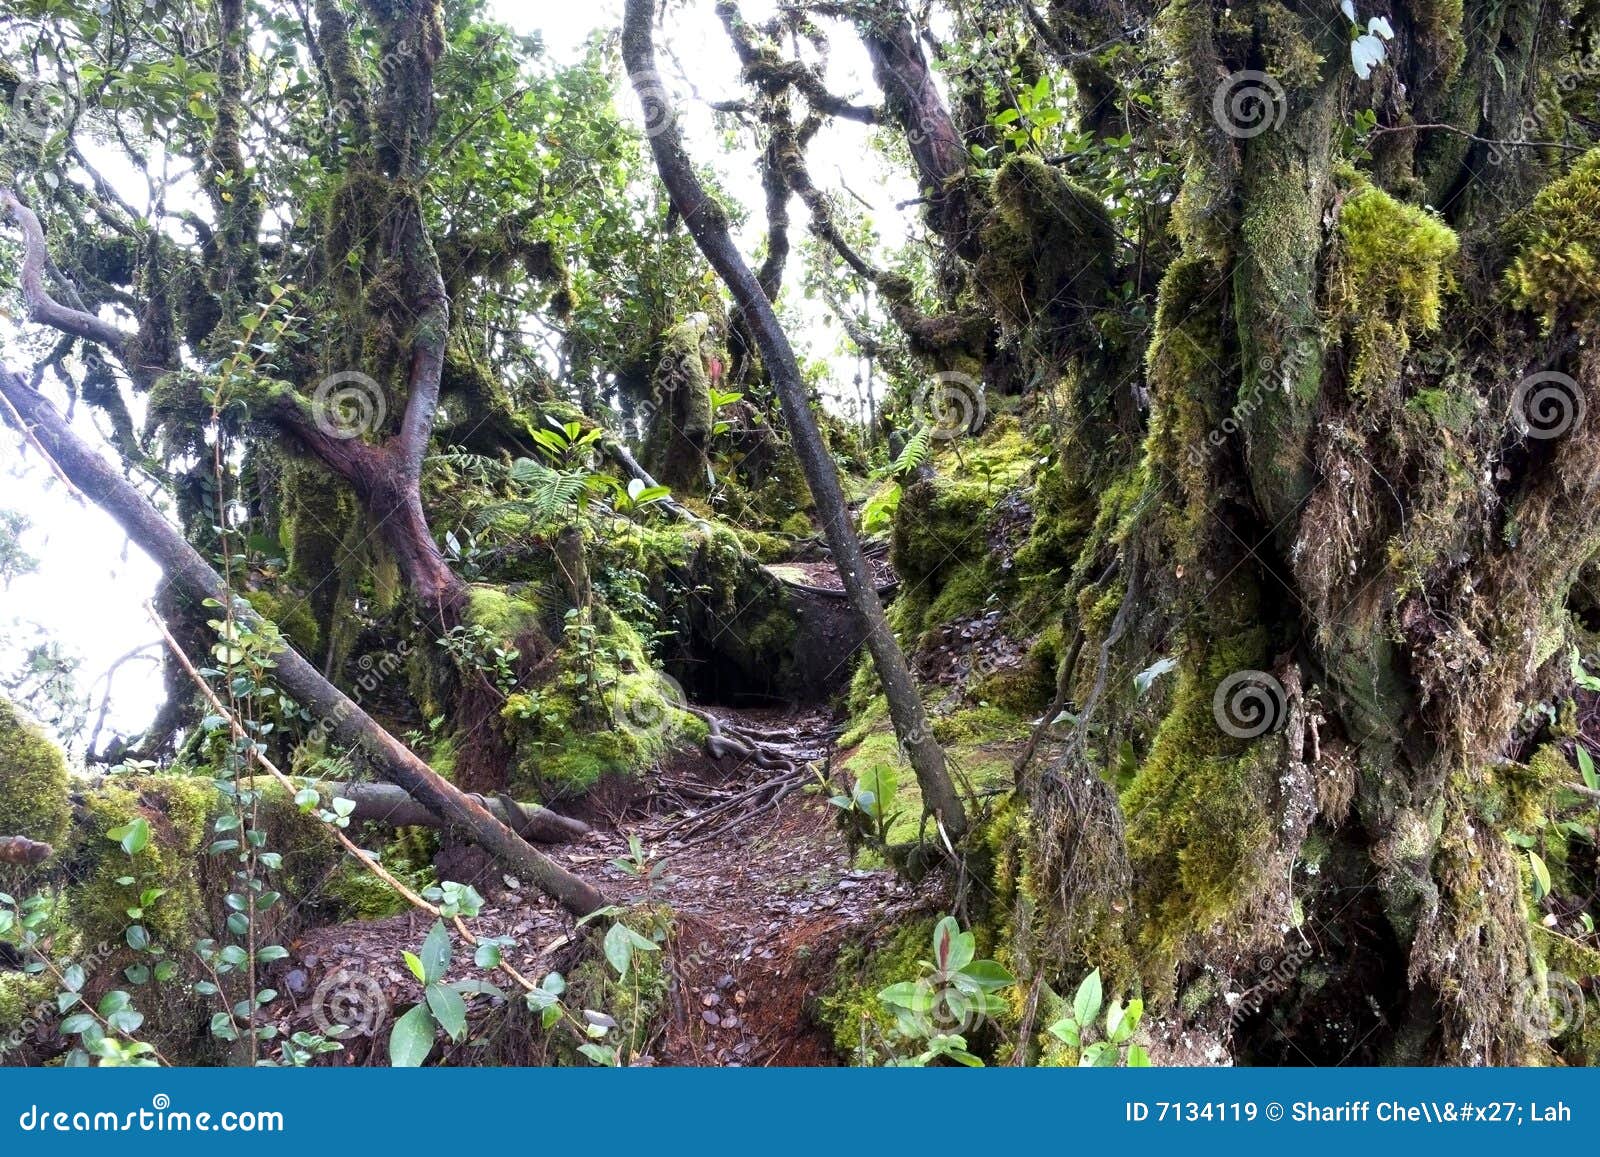 world's oldest mossy forest